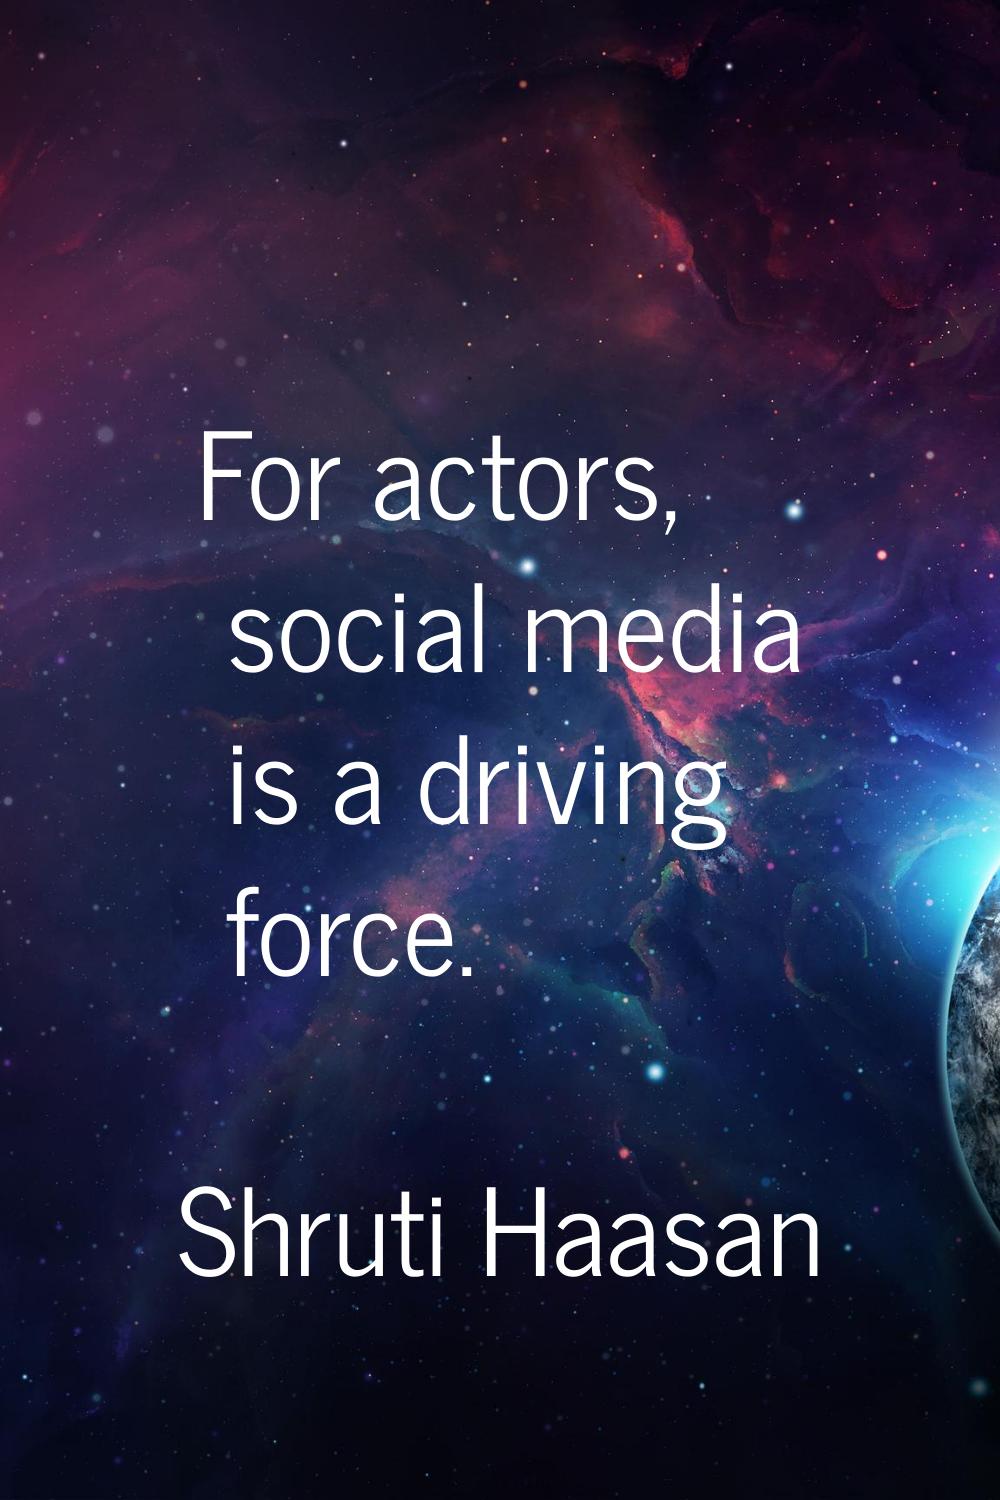 For actors, social media is a driving force.